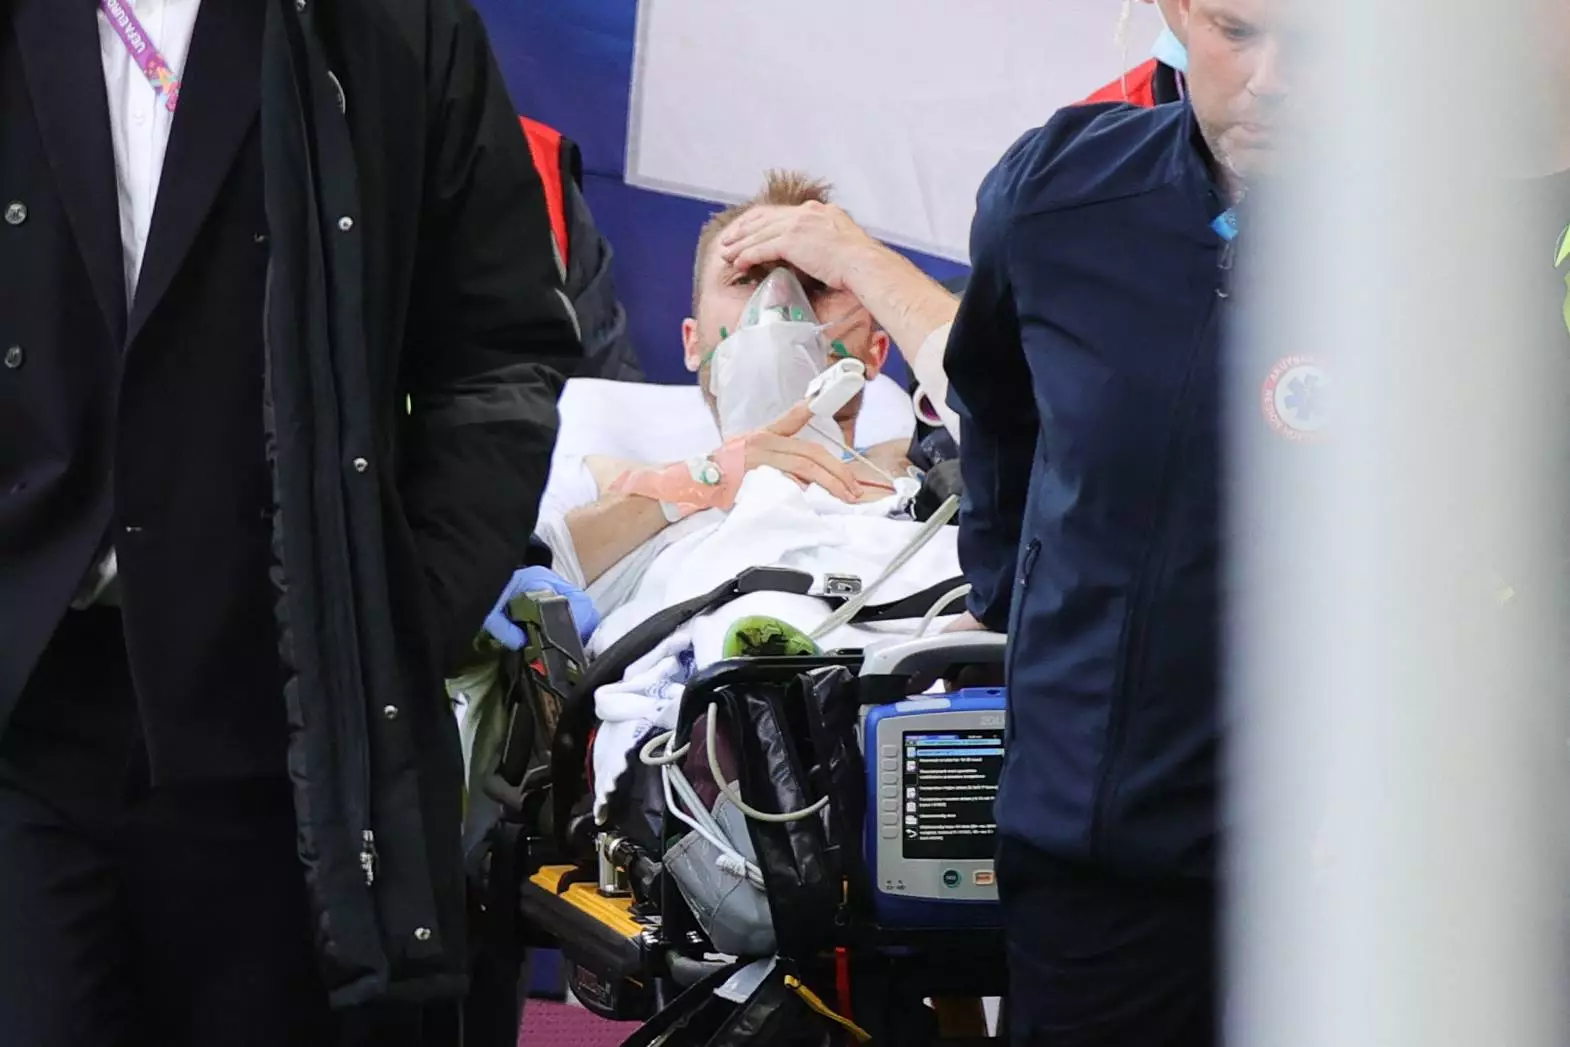 Eriksen was rushed to hospital.